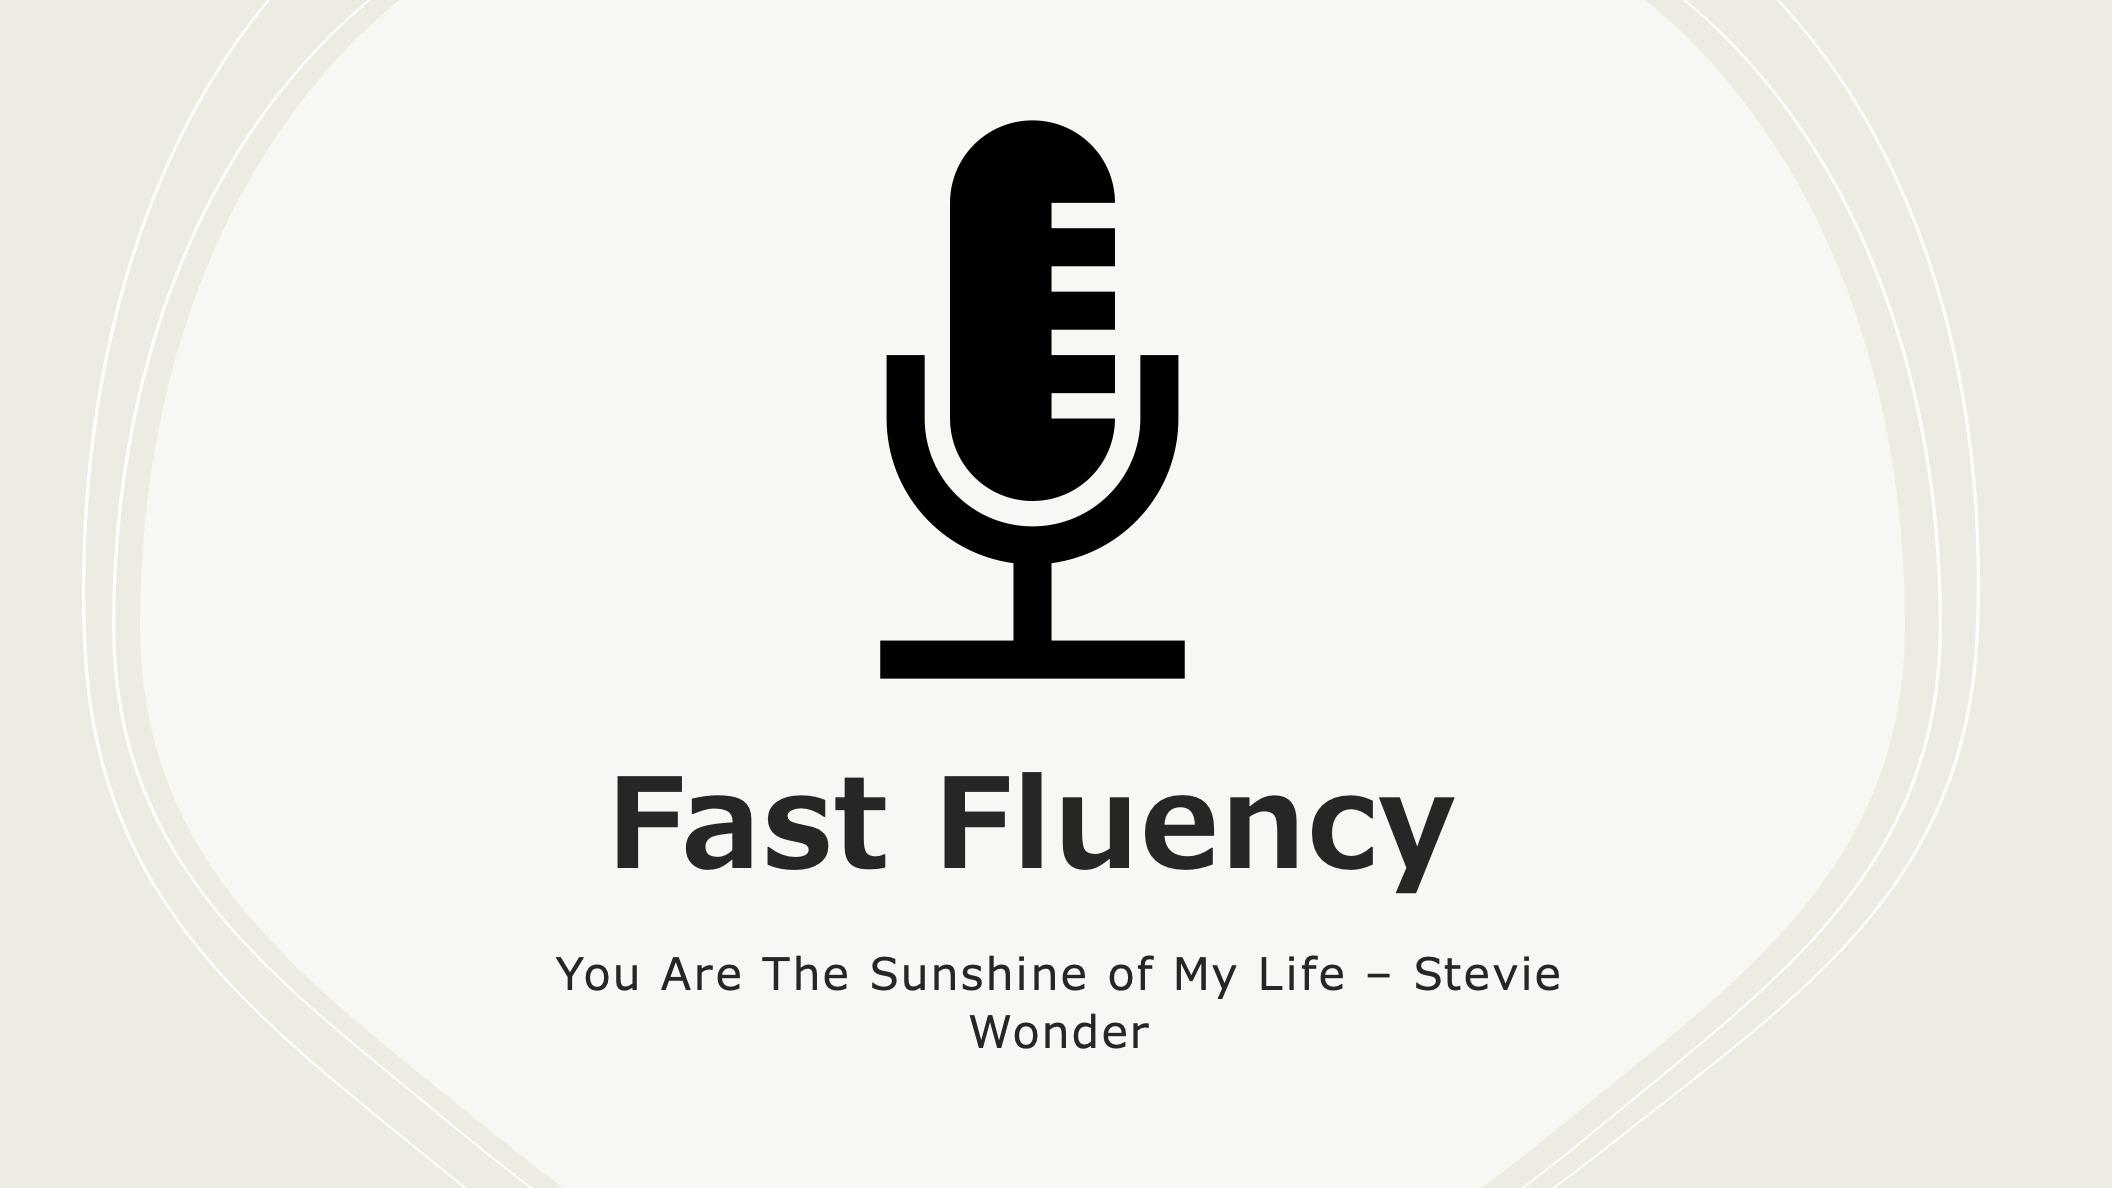 Fast Fluency: You Are The Sunshine of My Life